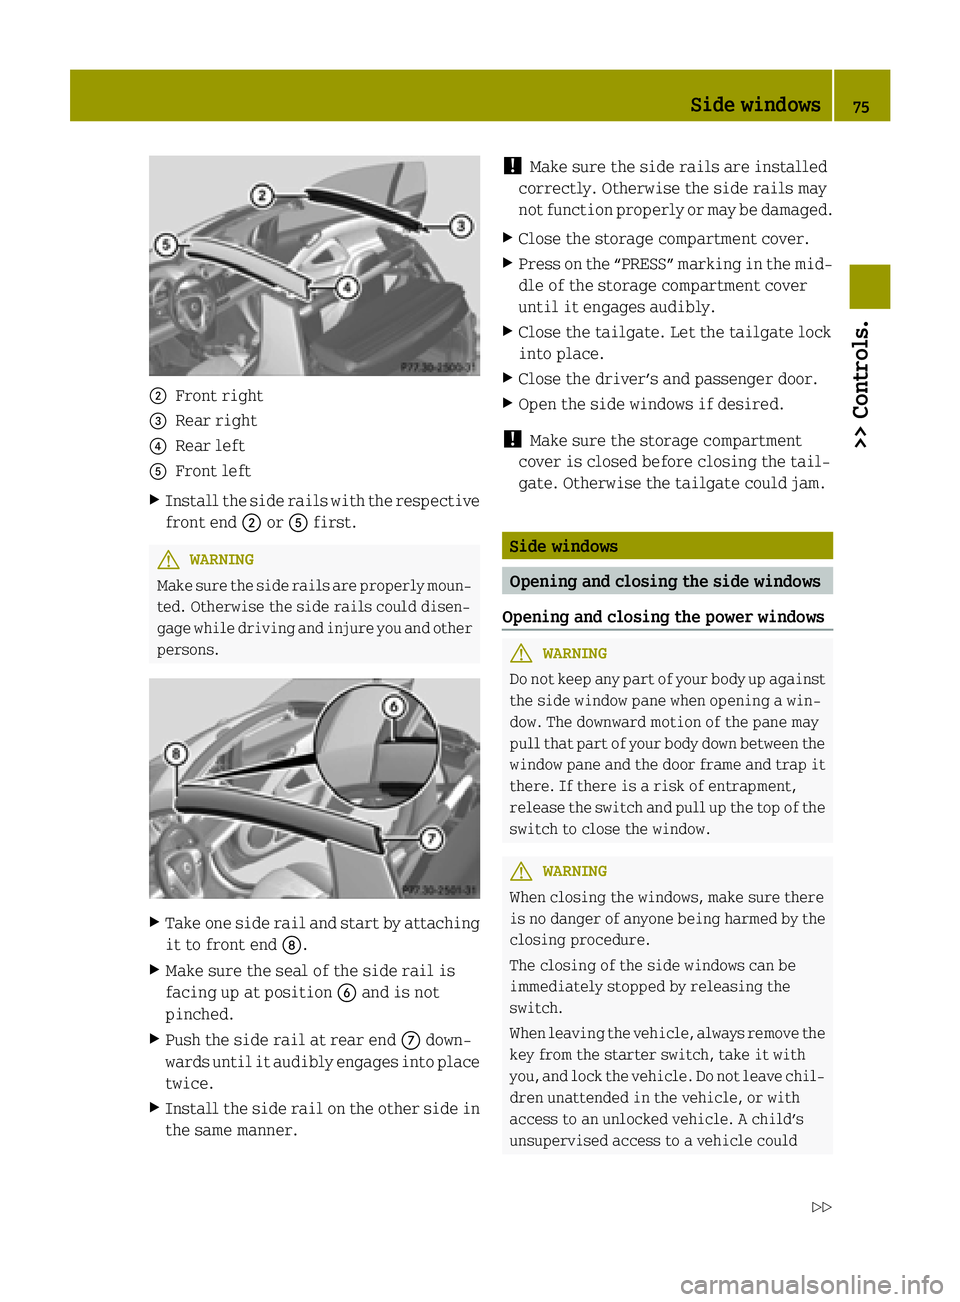 SMART FORTWO COUPE ELECTRIC DRIVE 2015 Manual PDF ;
Front right
= Rear right
? Rear left
A Front left
X Install the side rails with the respective
front end ;orA first. G
WARNING
Make sure the side rails are properly moun- ted. Otherwise the side rai